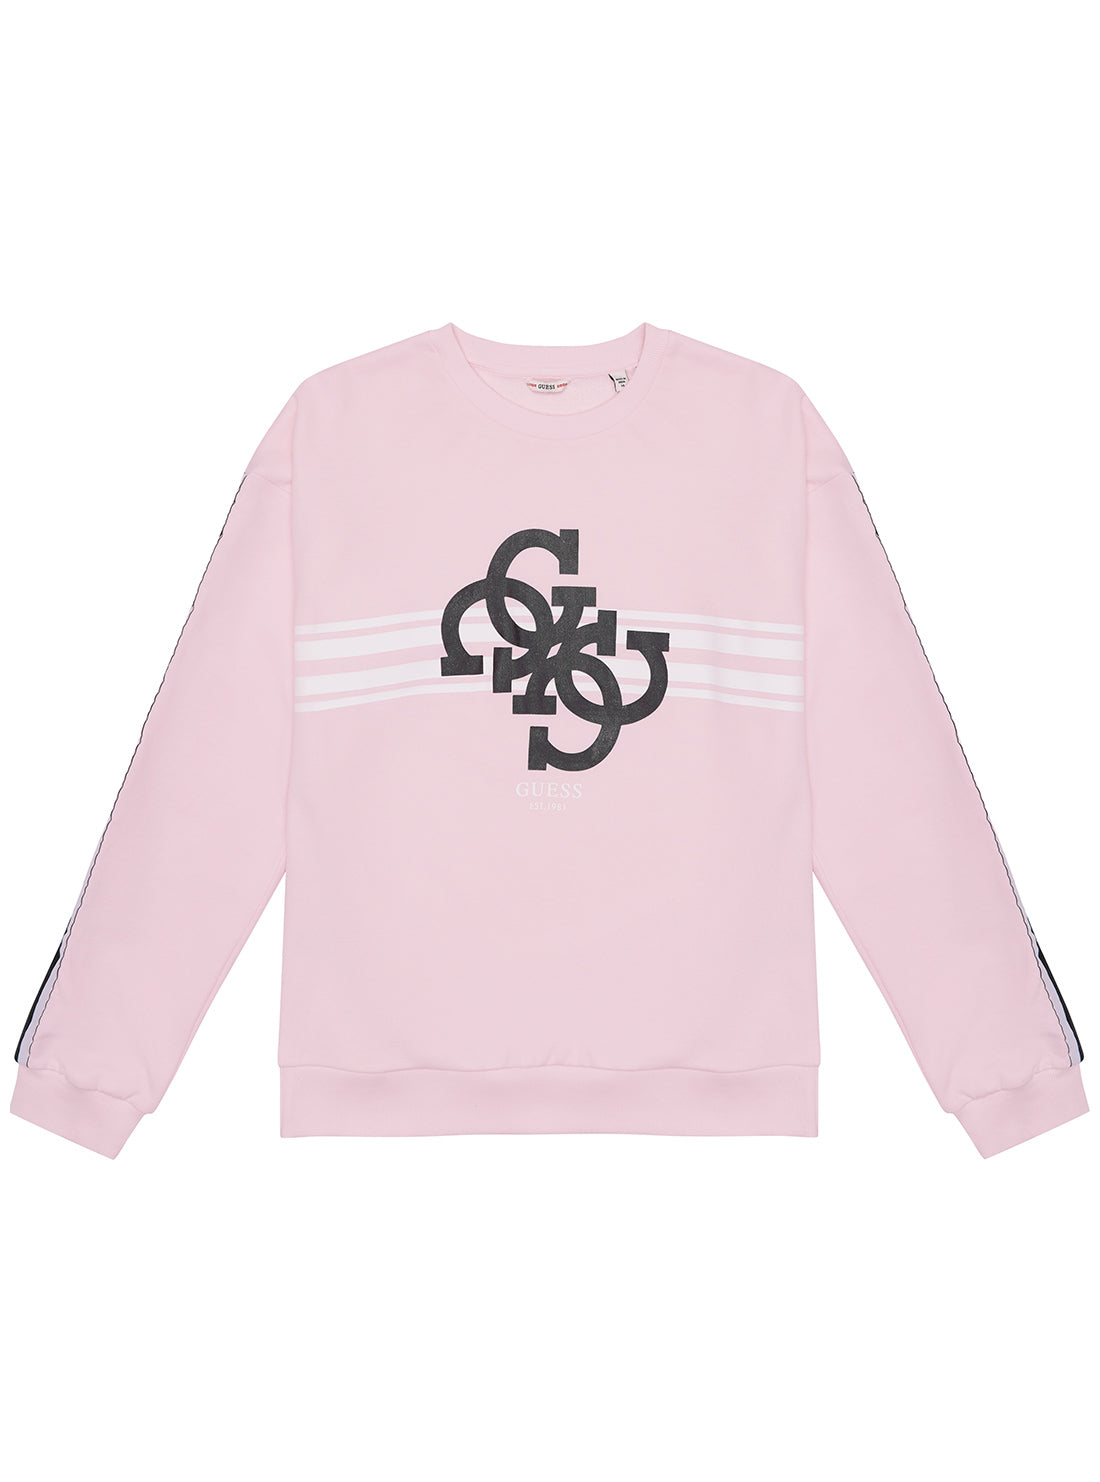 GUESS Pink Long Sleeve Jumper (7-16) front view